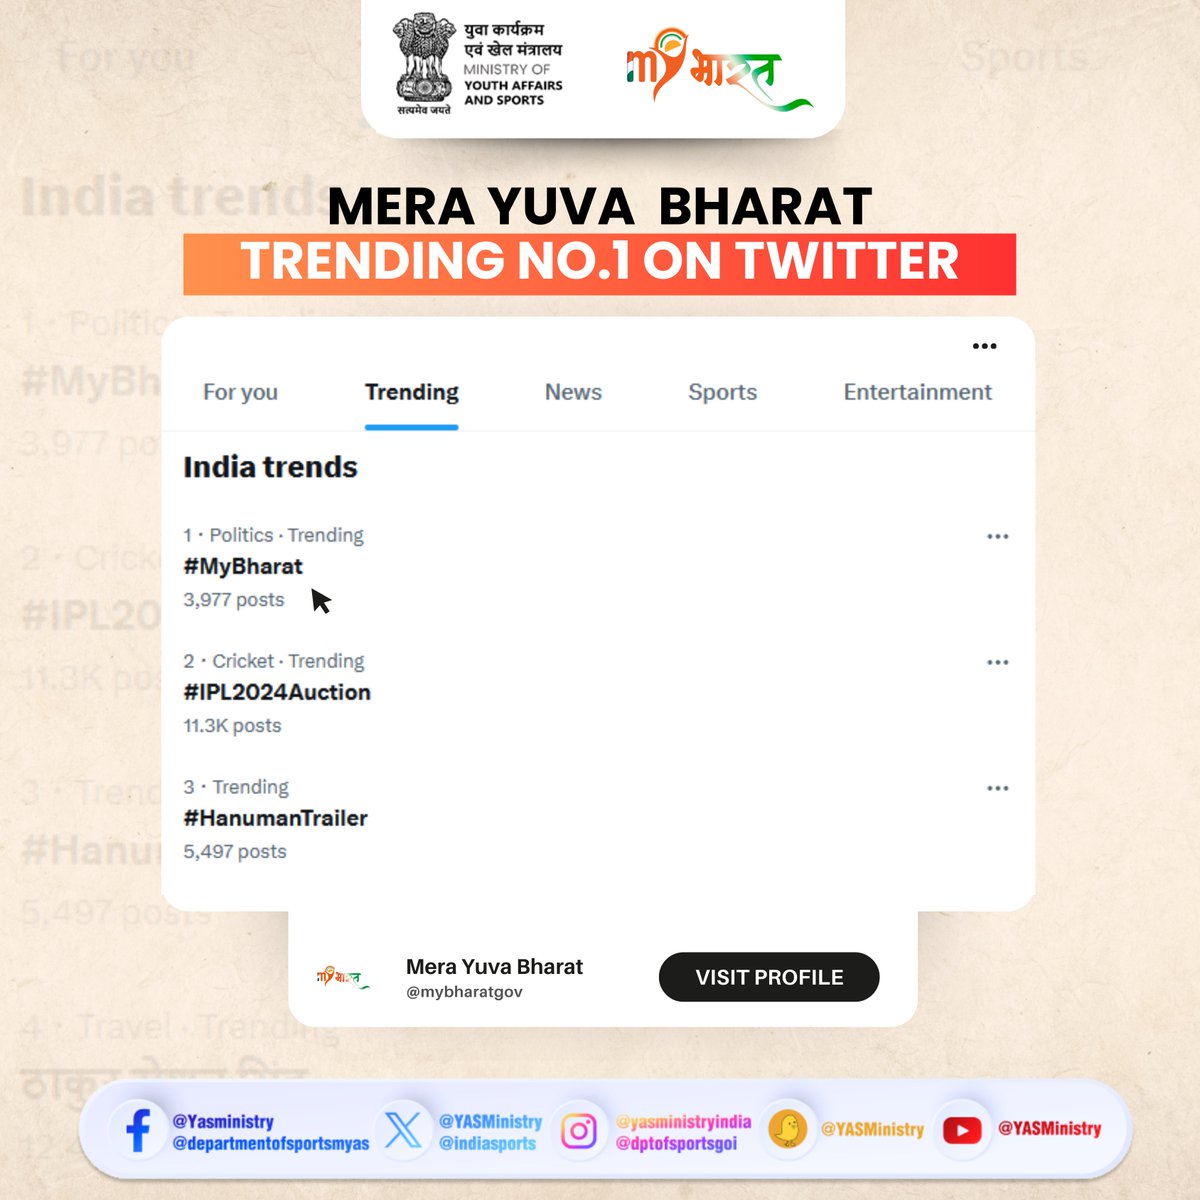 Come join the revolution! #MYBharat is trending at #1, register now at 👉 mybharat.gov.in and be a driving force for the growth of our nation. #MeraYuvaBharat